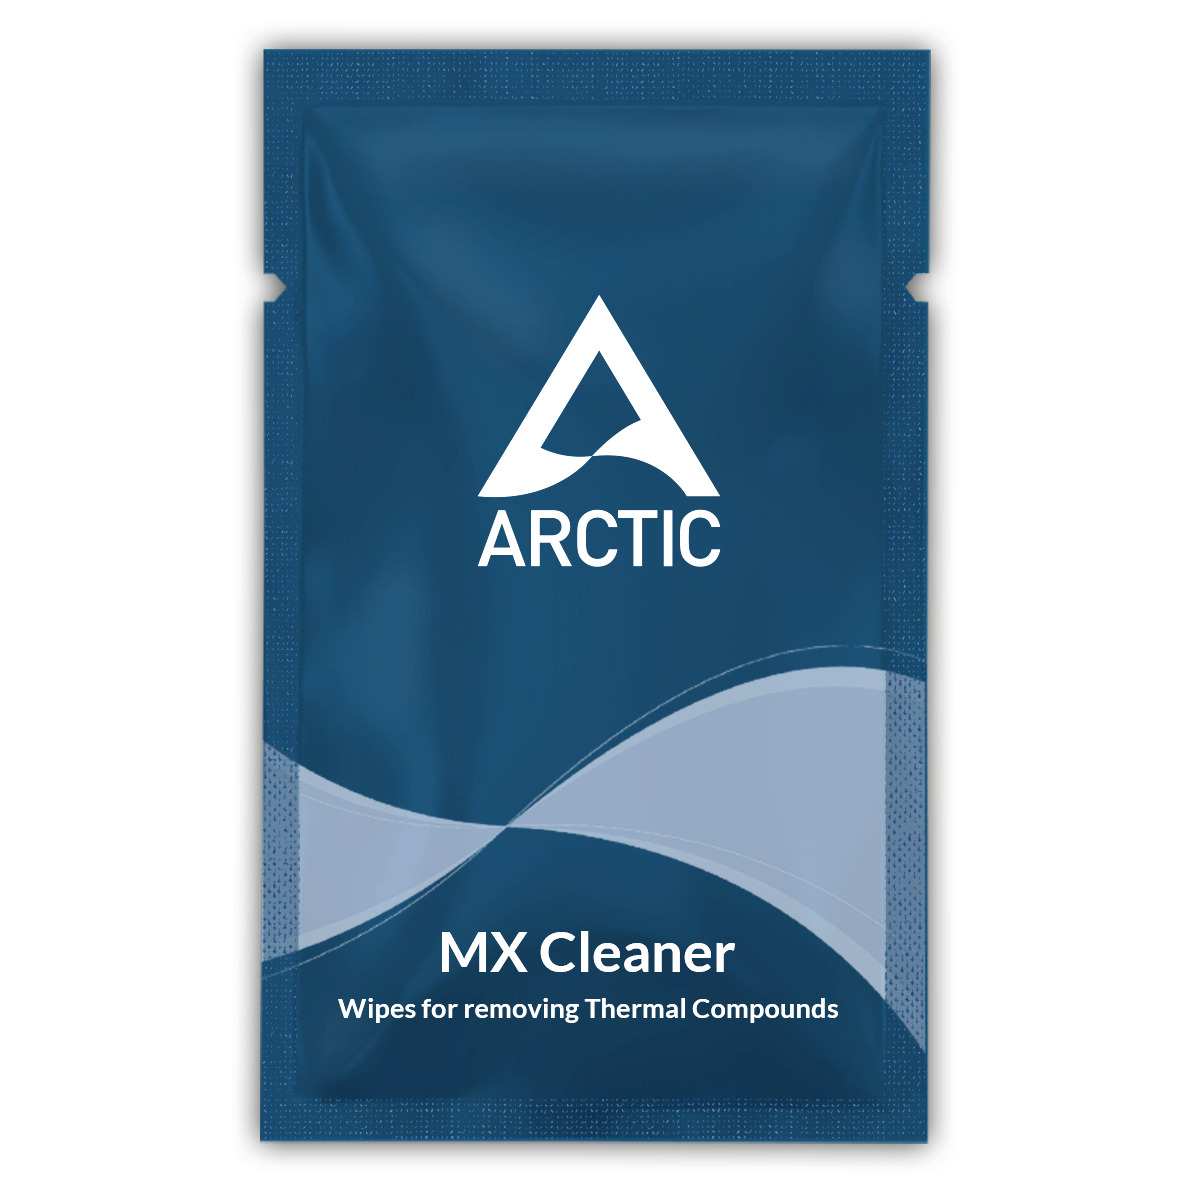 ARCTIC MX Cleaner (40 pieces) - Cleaning wipes for removing thermal paste